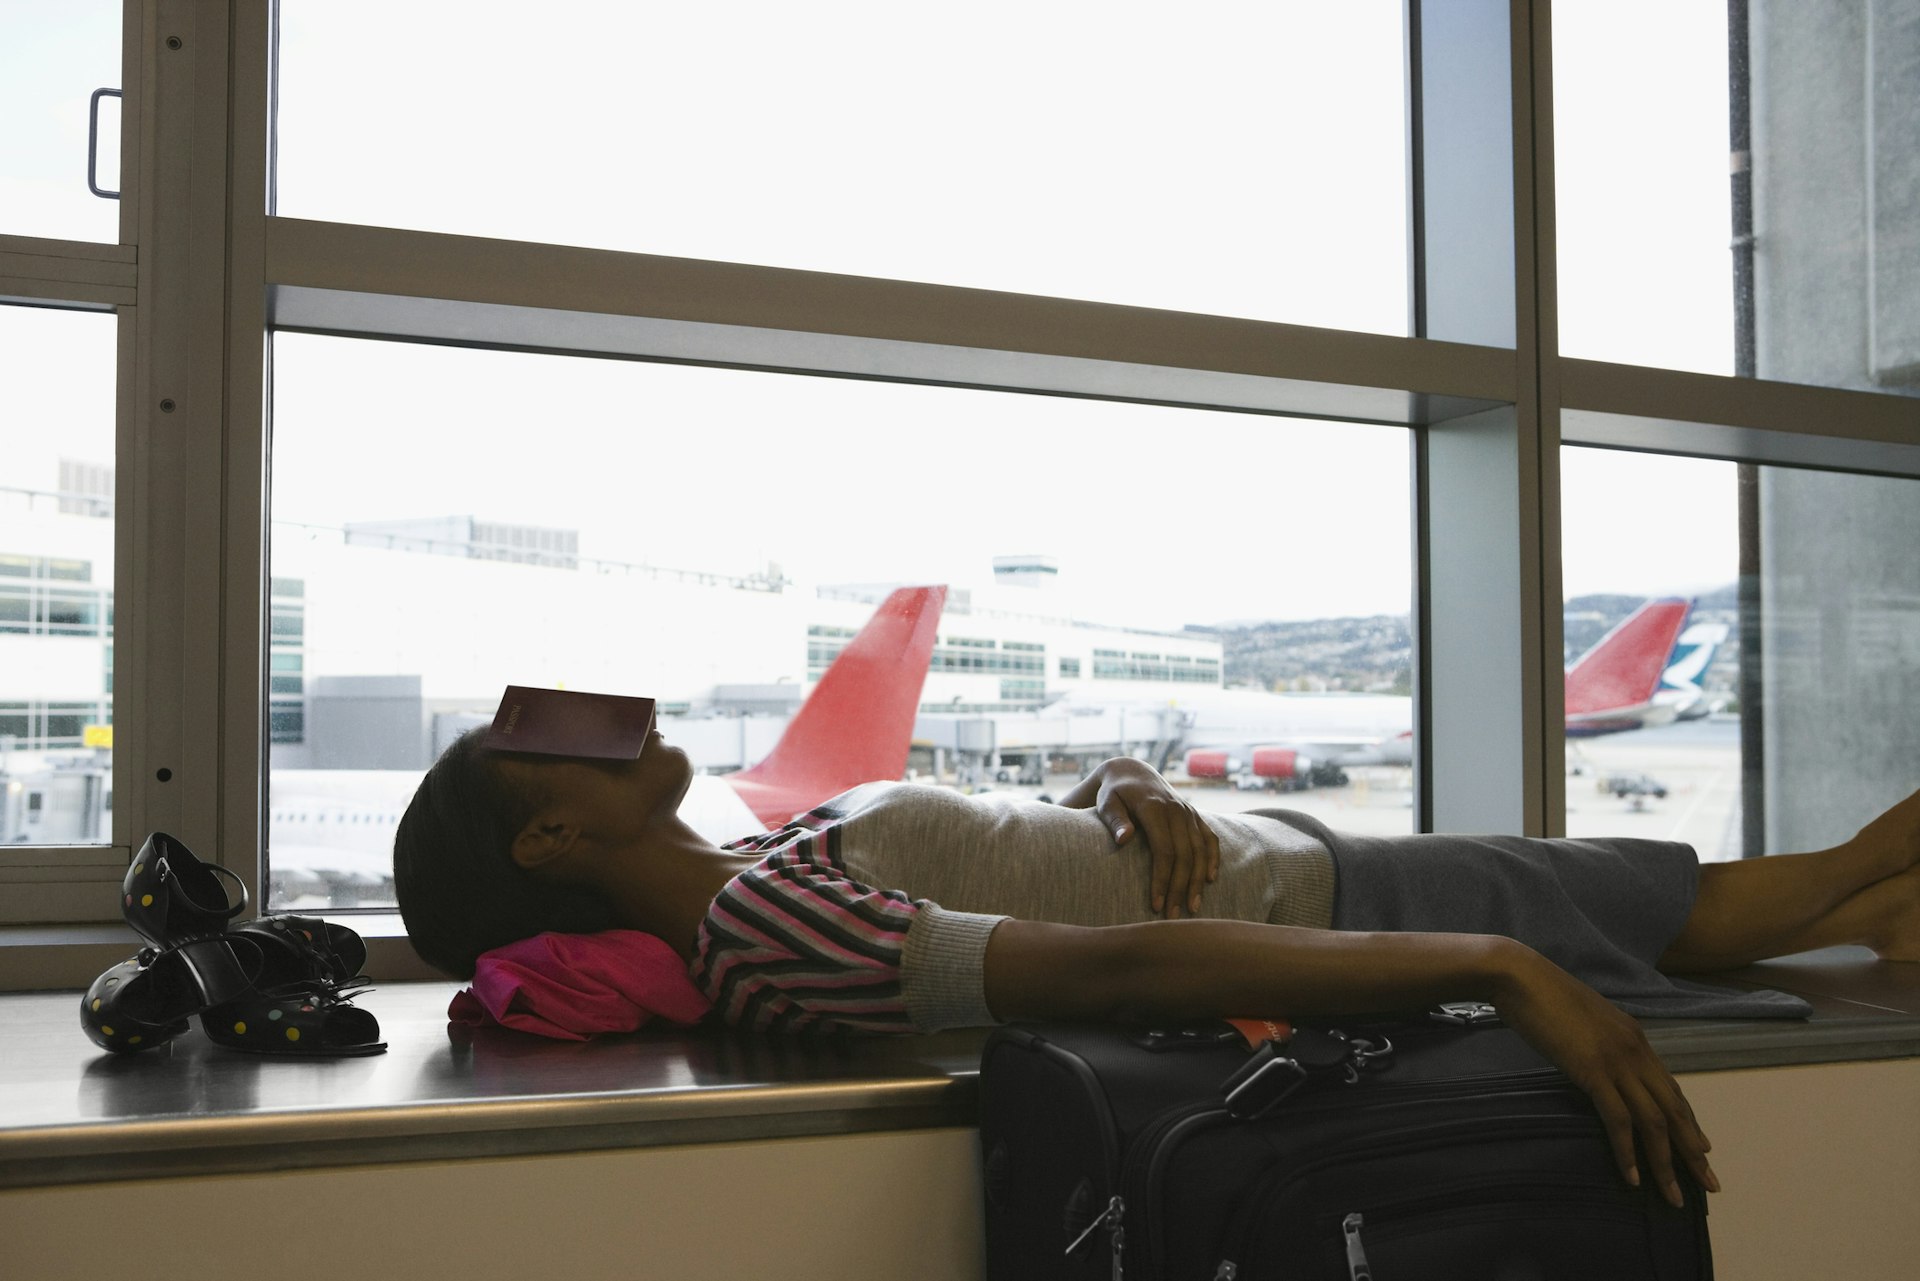 A woman with jet lag lies on her back sleeps on a large window sill. There is a open book laid across her face to block the light. One hand is folded over her stomach while another is outstretched over her suitcase. Her shoes are set just above her head on the sill. Outside the window are planes parked at gates.